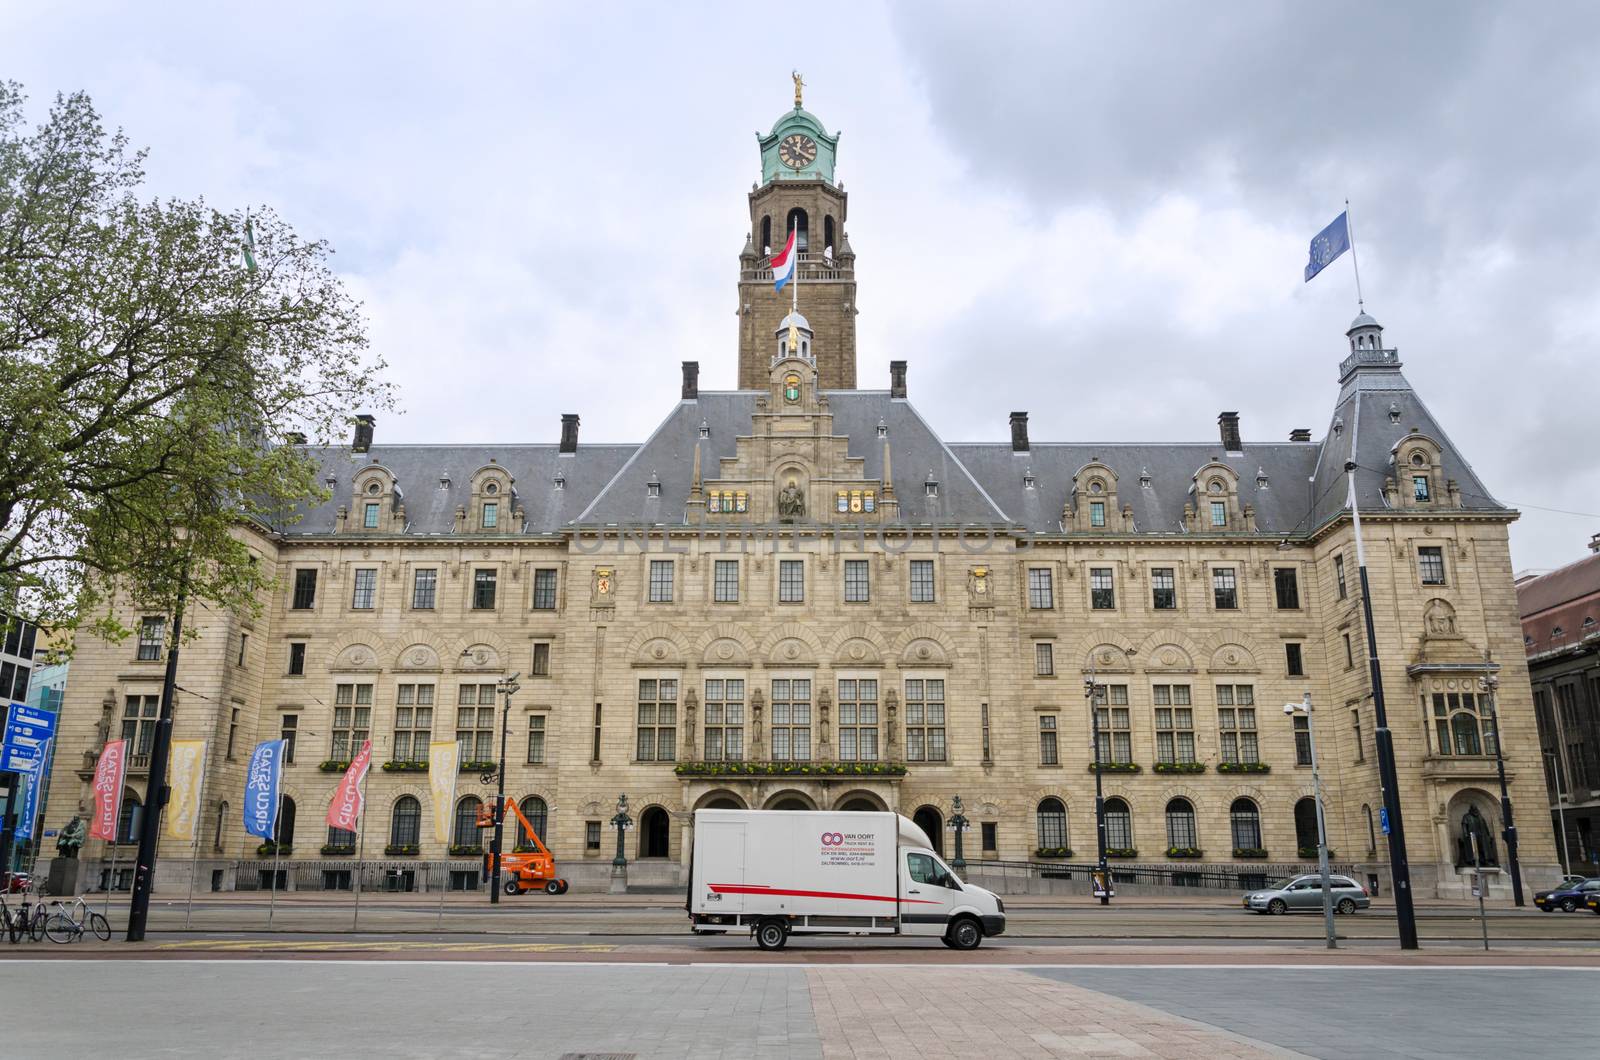 Rotterdam, Netherlands - May 9, 2015: People visit Town hall of Rotterdam on May 9, 2015. The foundation stone was laid by Queen Wilhelmina on July 15, 1915.